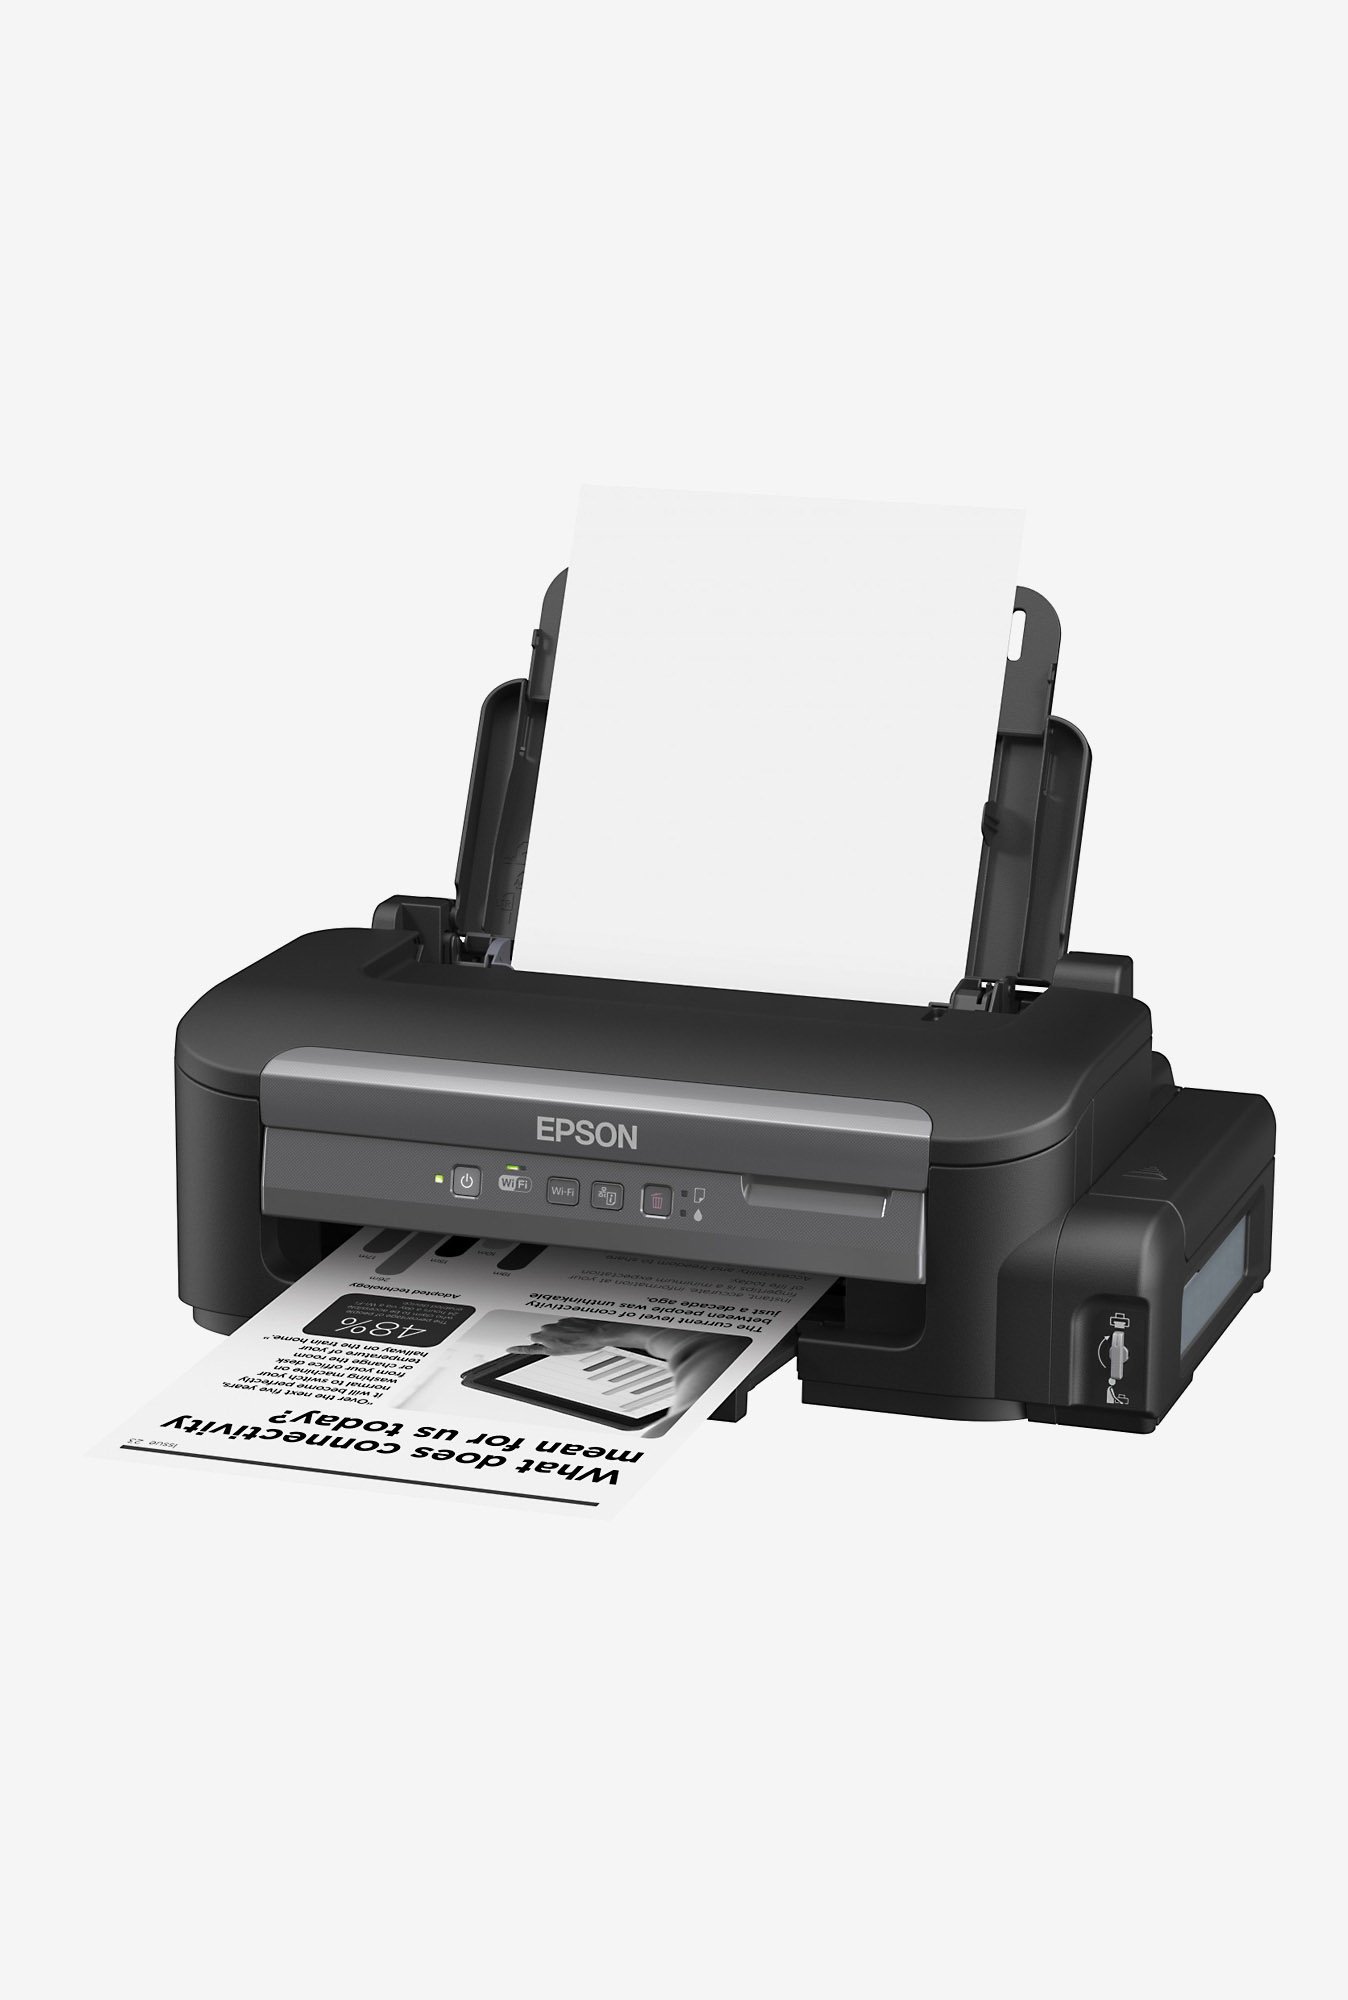 Epson M105 34 Ppm Ink Tank Printer Black From Epson At Best Prices On Tata Cliq